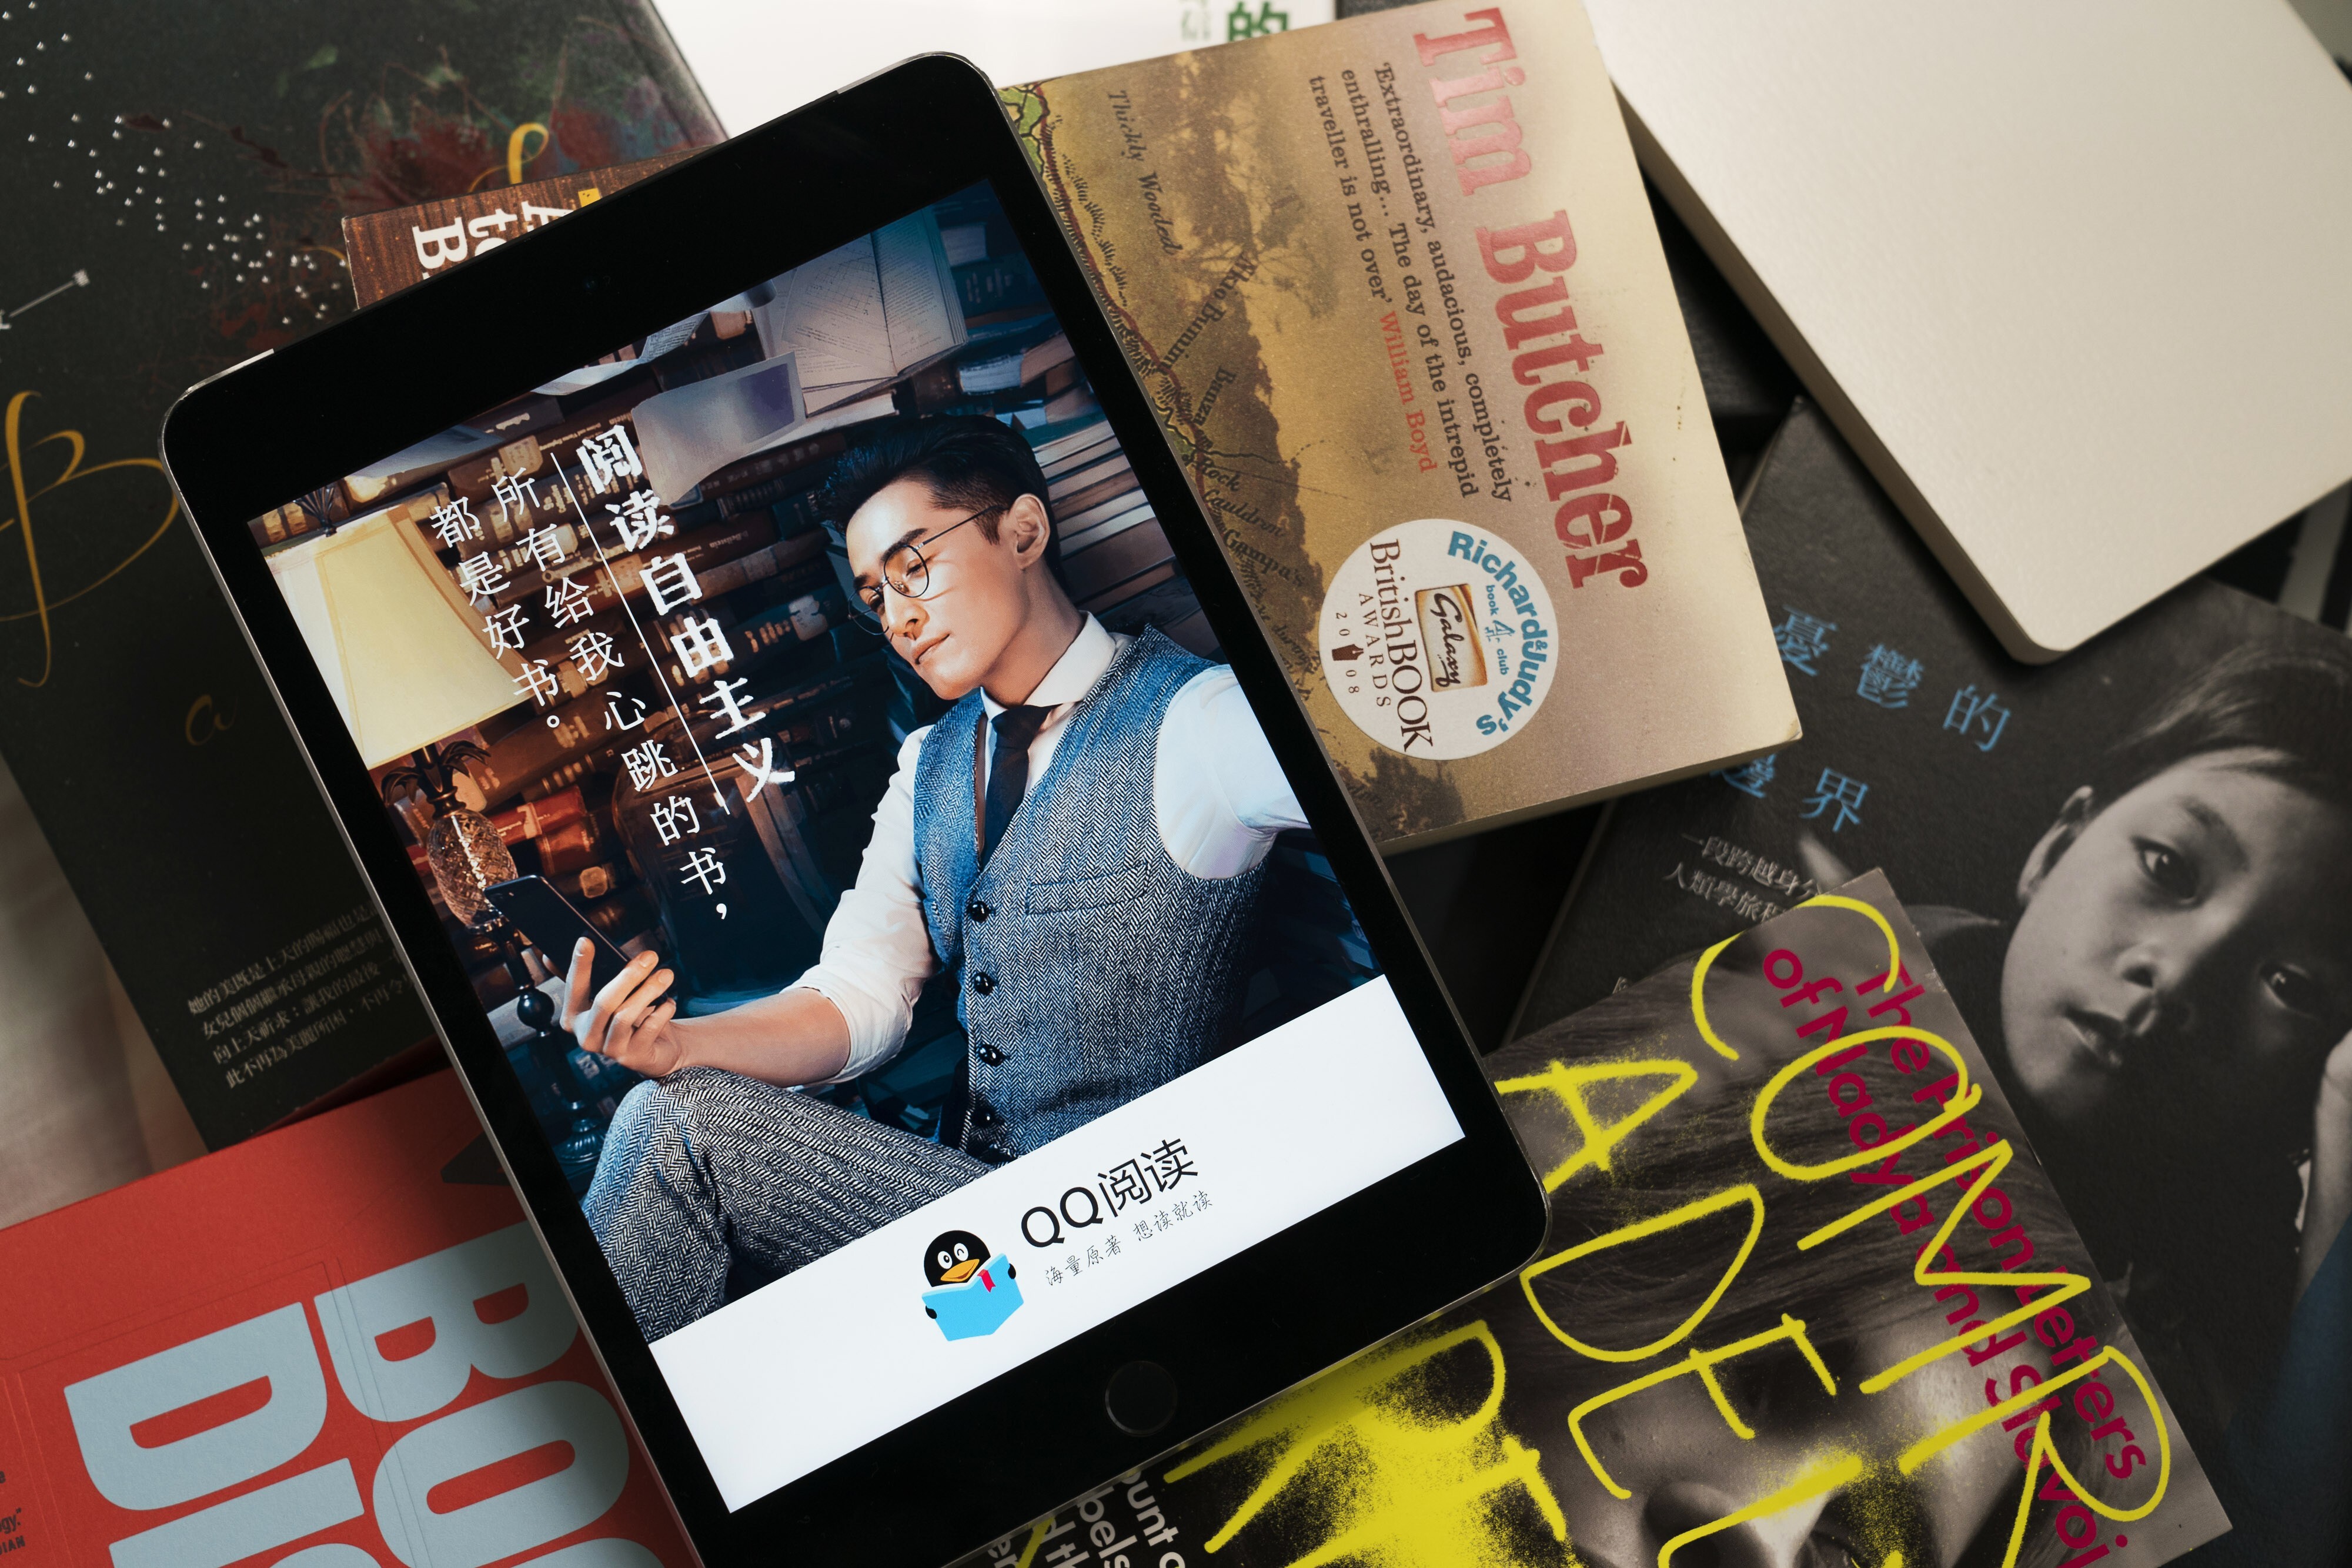 A welcome screen for the QQ Reading application, operated by China Literature, is displayed on an Apple iPad mini. Photo: Bloomberg